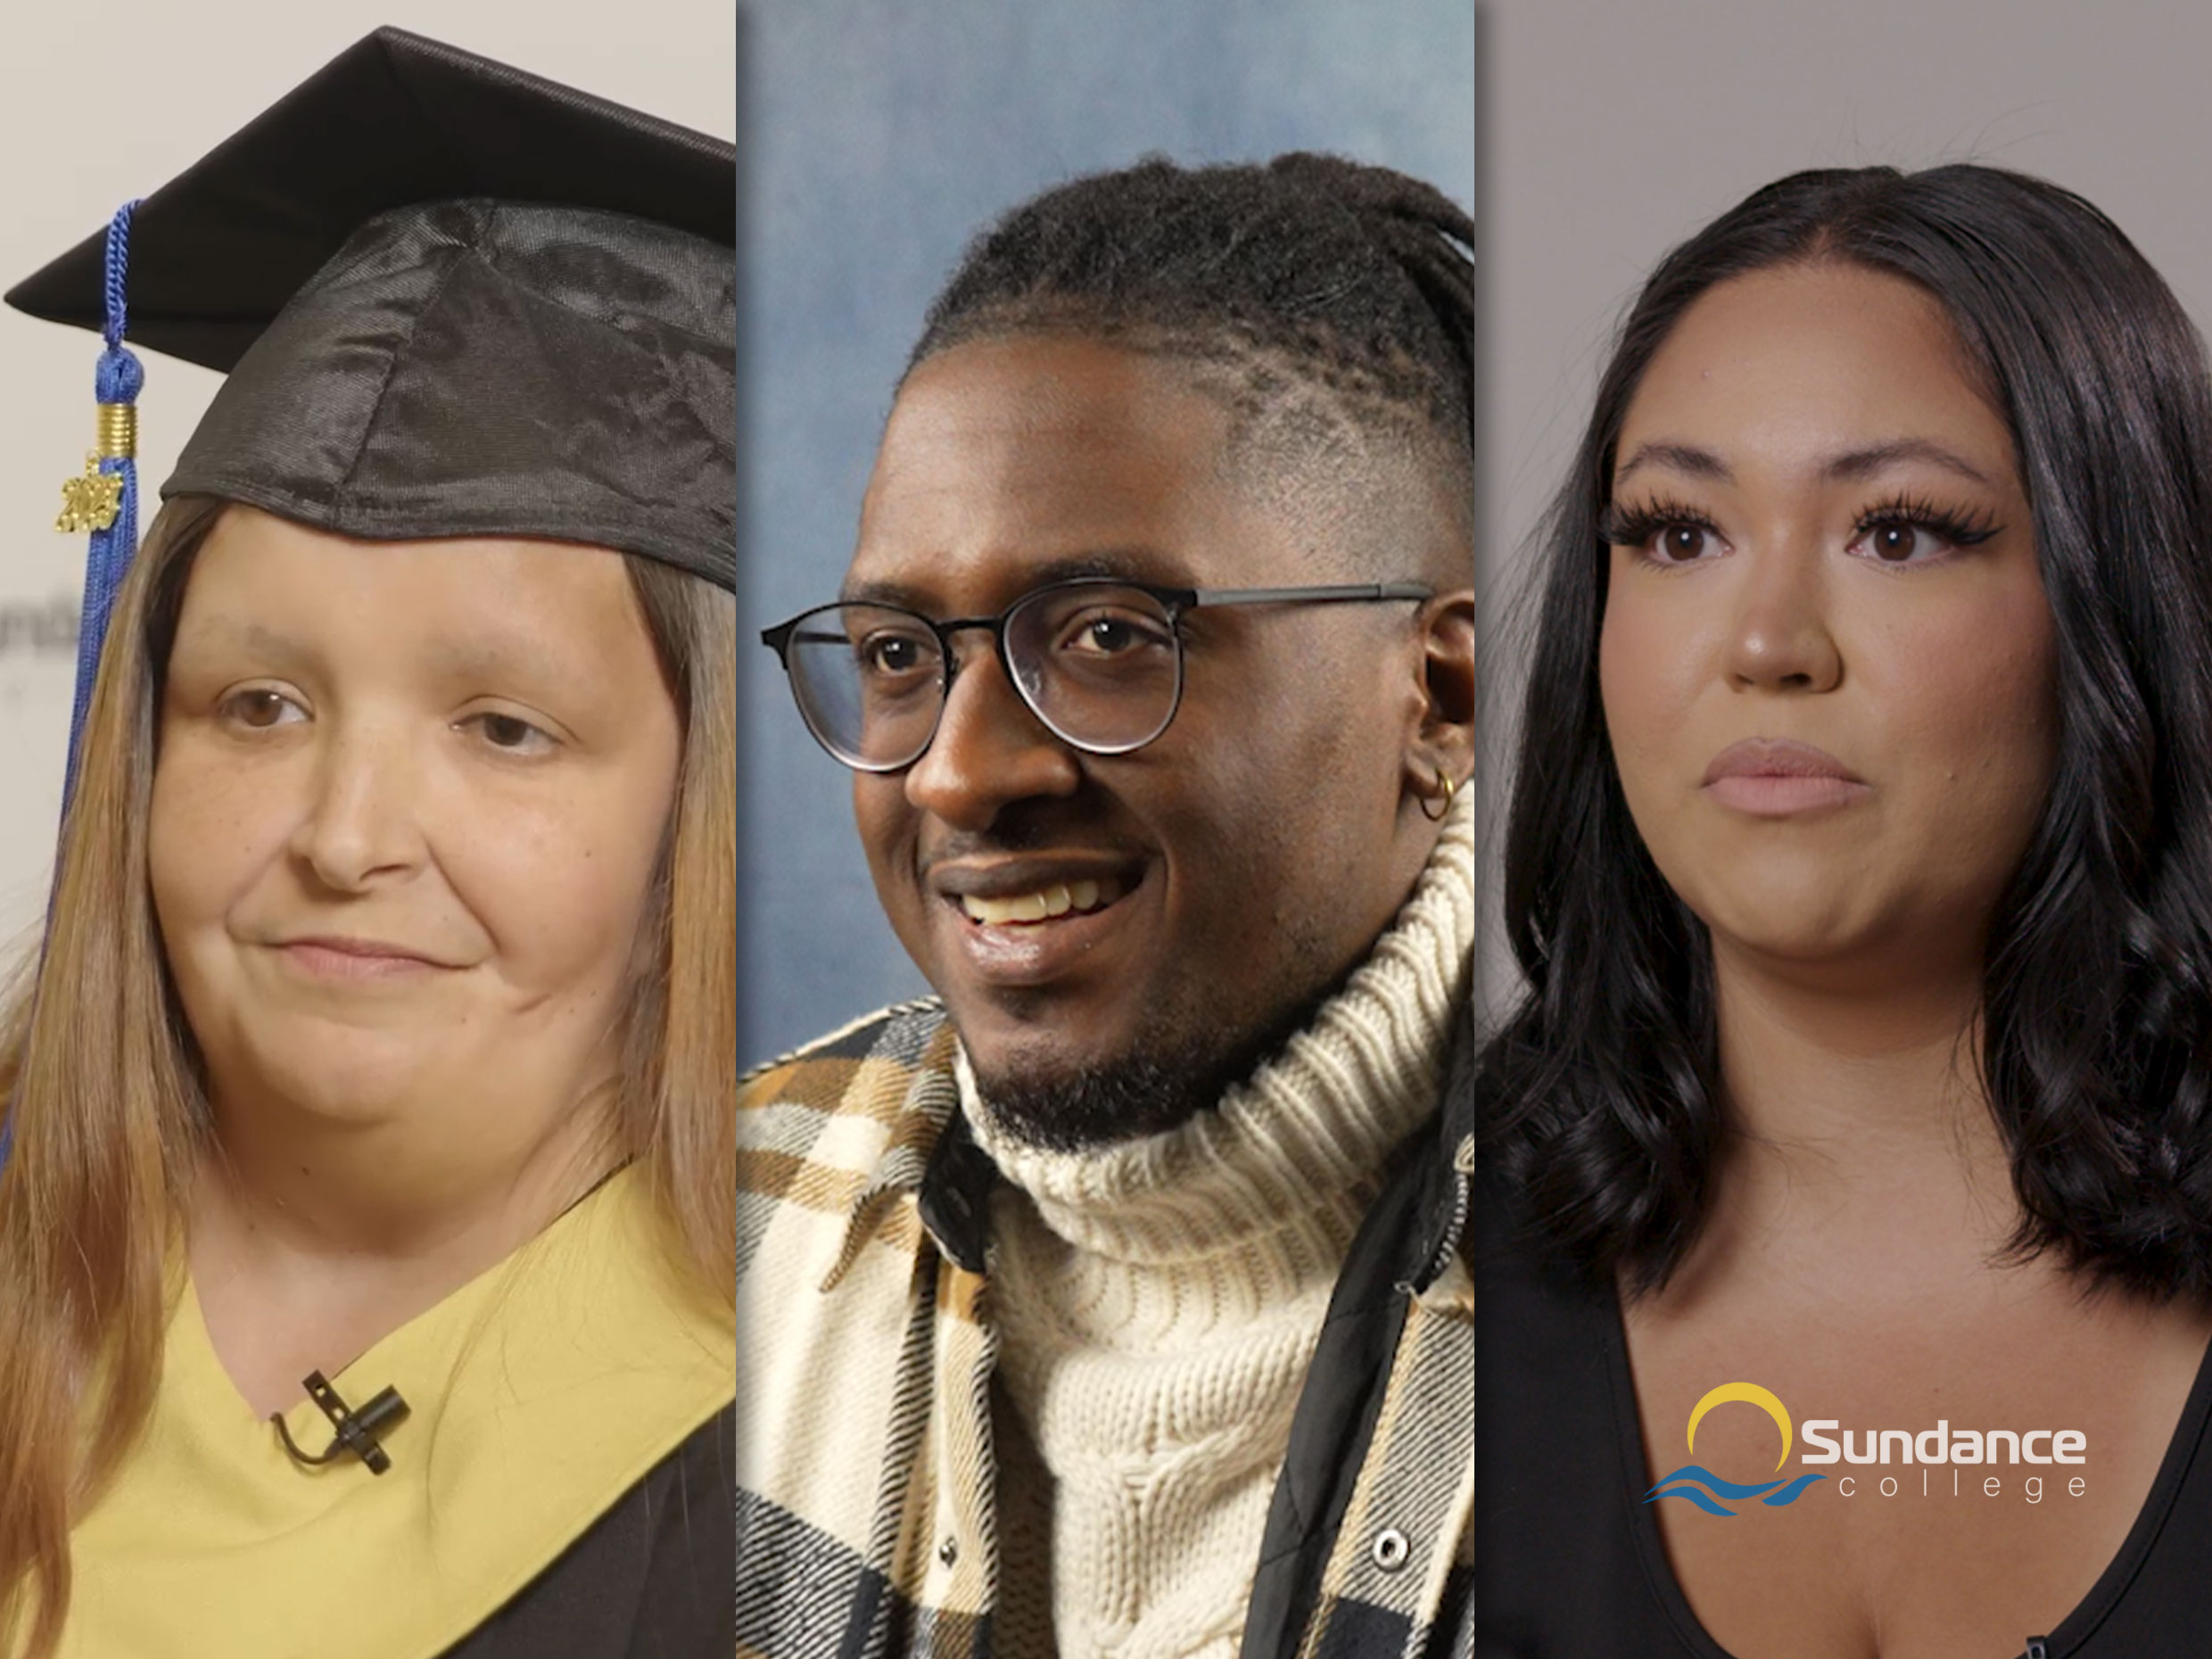 Three Sundance College graduates from different diploma programs: Valerie R., Medical Office Administration; Hananeel C., Digital Marketing and Social Media Management; Shawna L., Addictions and Community Health Professional.